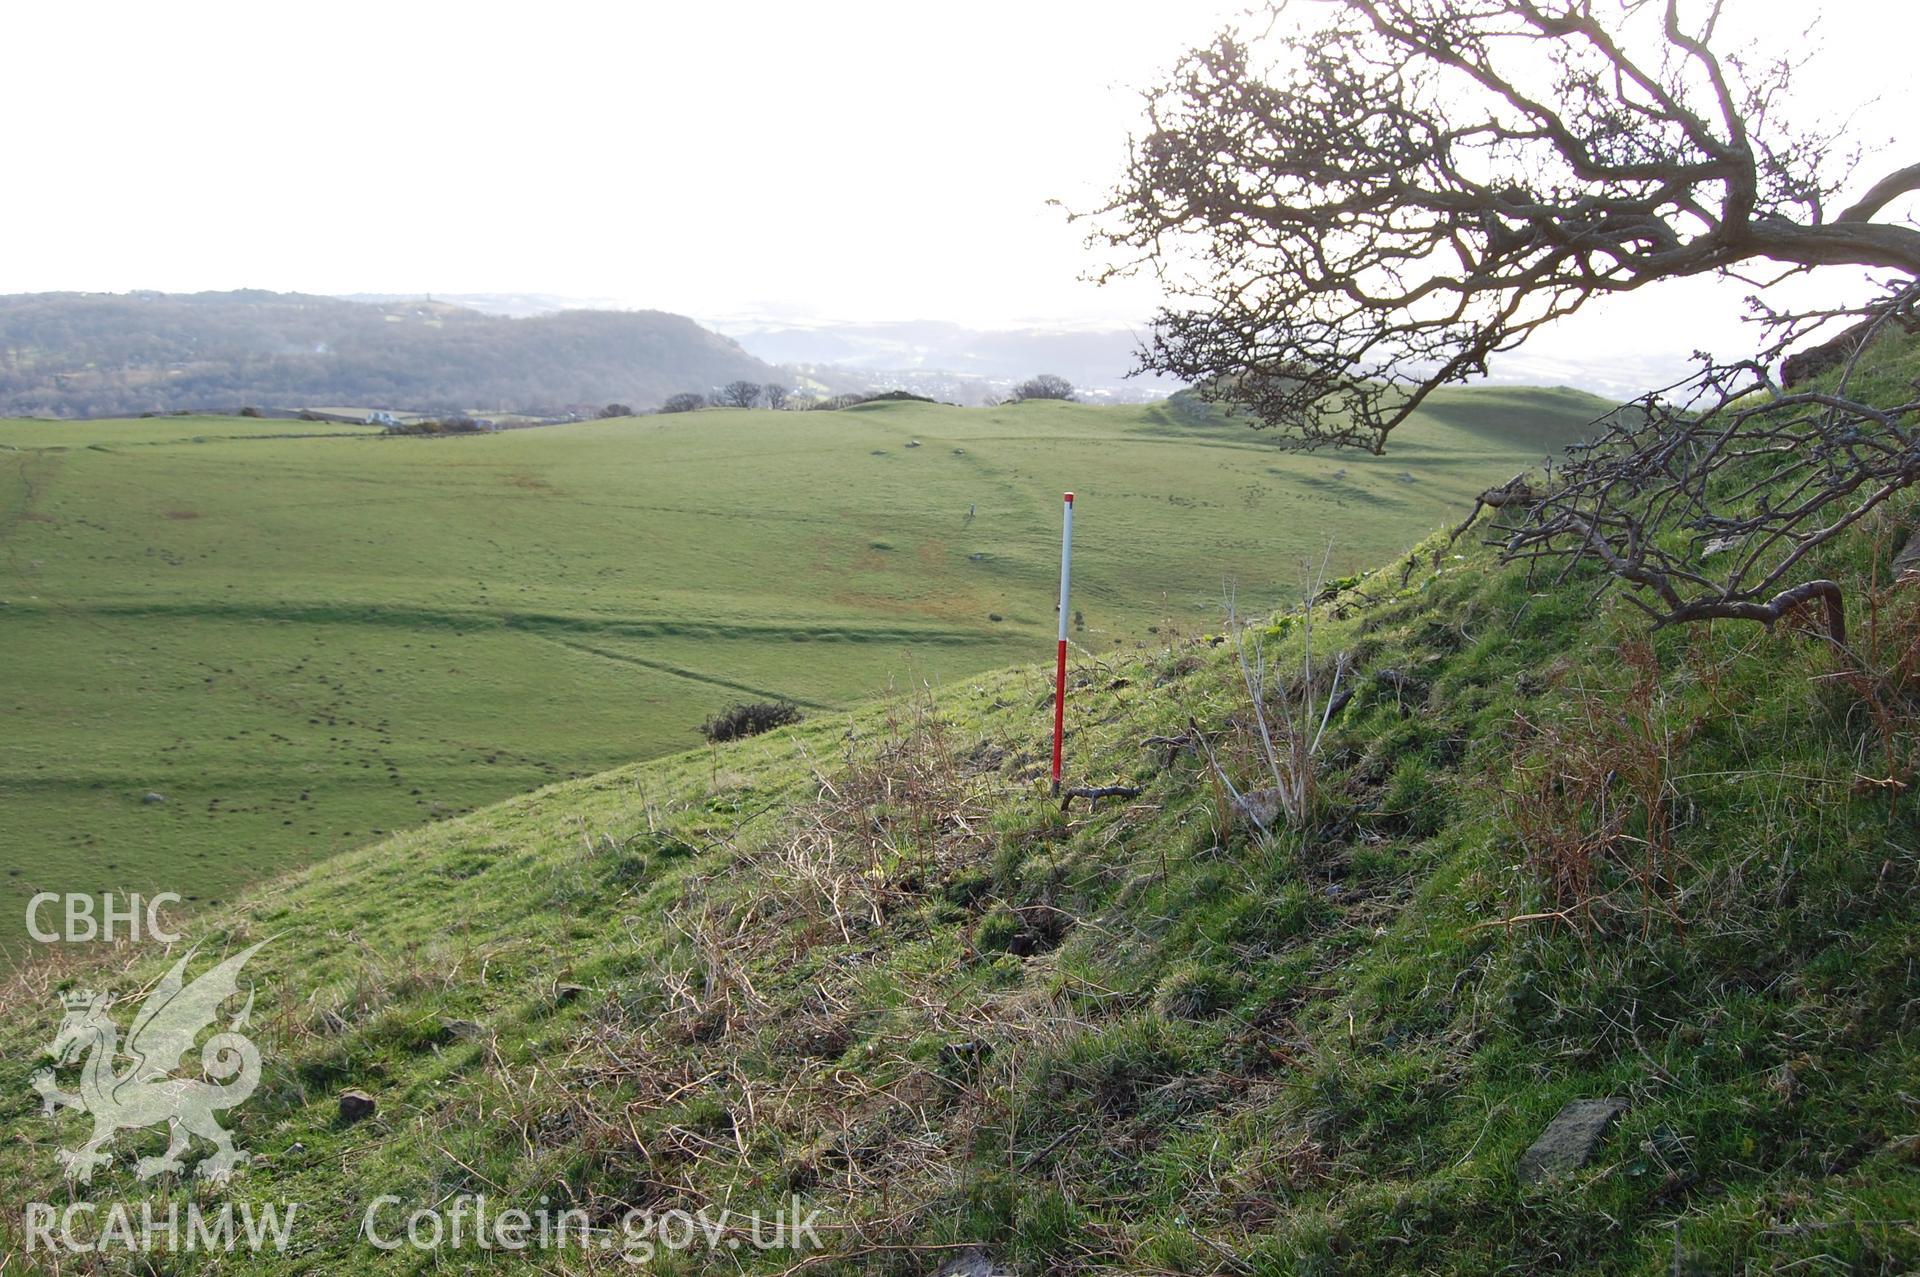 Digital photograph from an archaeological assessment of Deganwy Castle, carried out by Gwynedd Archaeological Trust, 2009. Ditch/platform under Mansel's Tower.